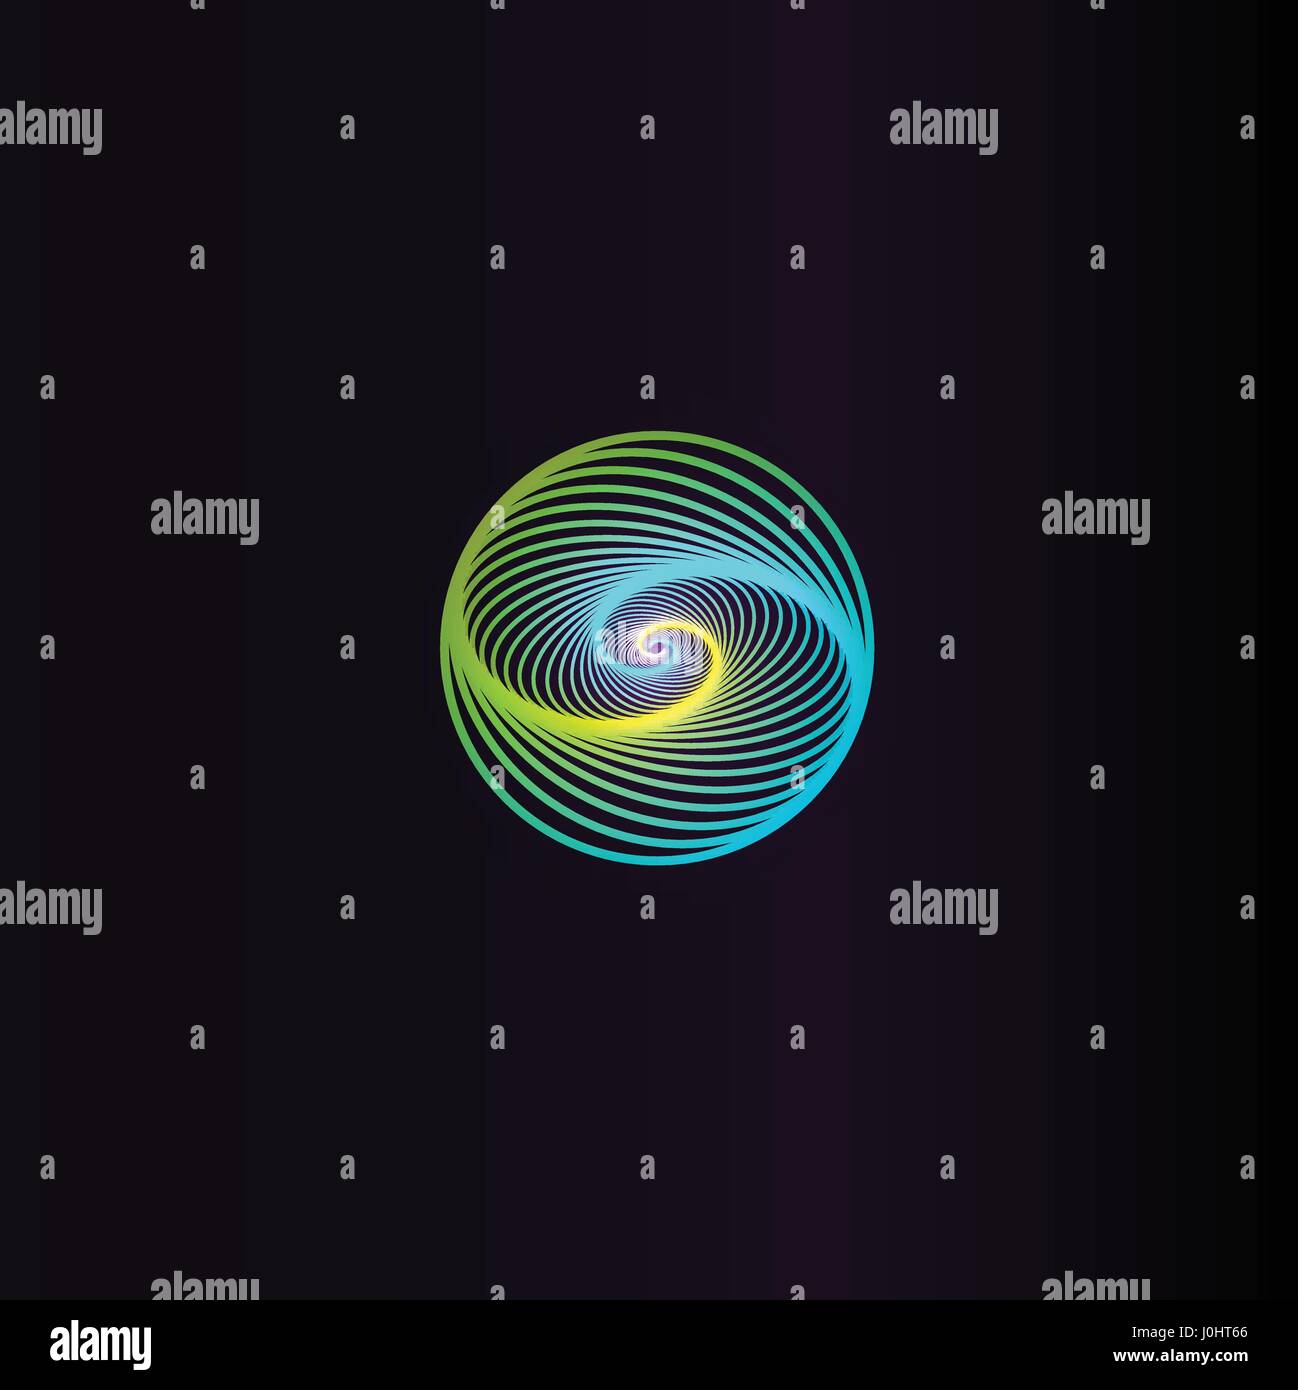 Isolated abstract colorful round shape logo, space element, swirl logotype, planet icon on black background vector illustration Stock Vector